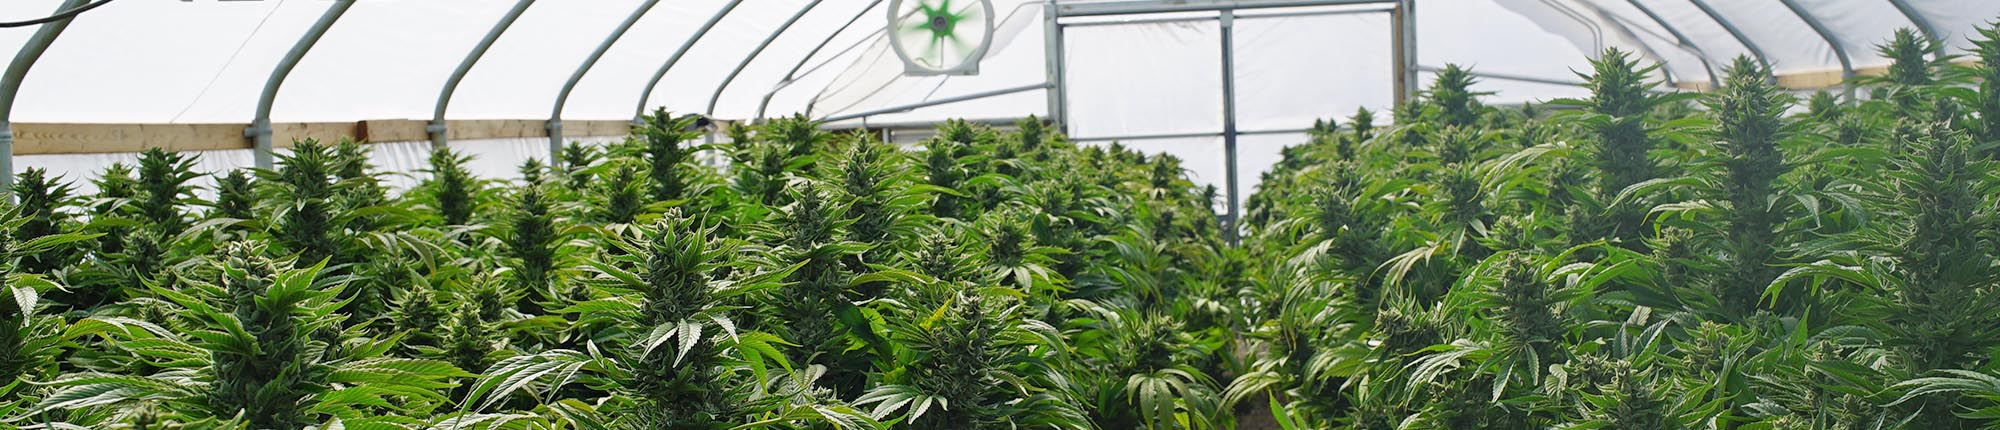 Cannabis growing license experts